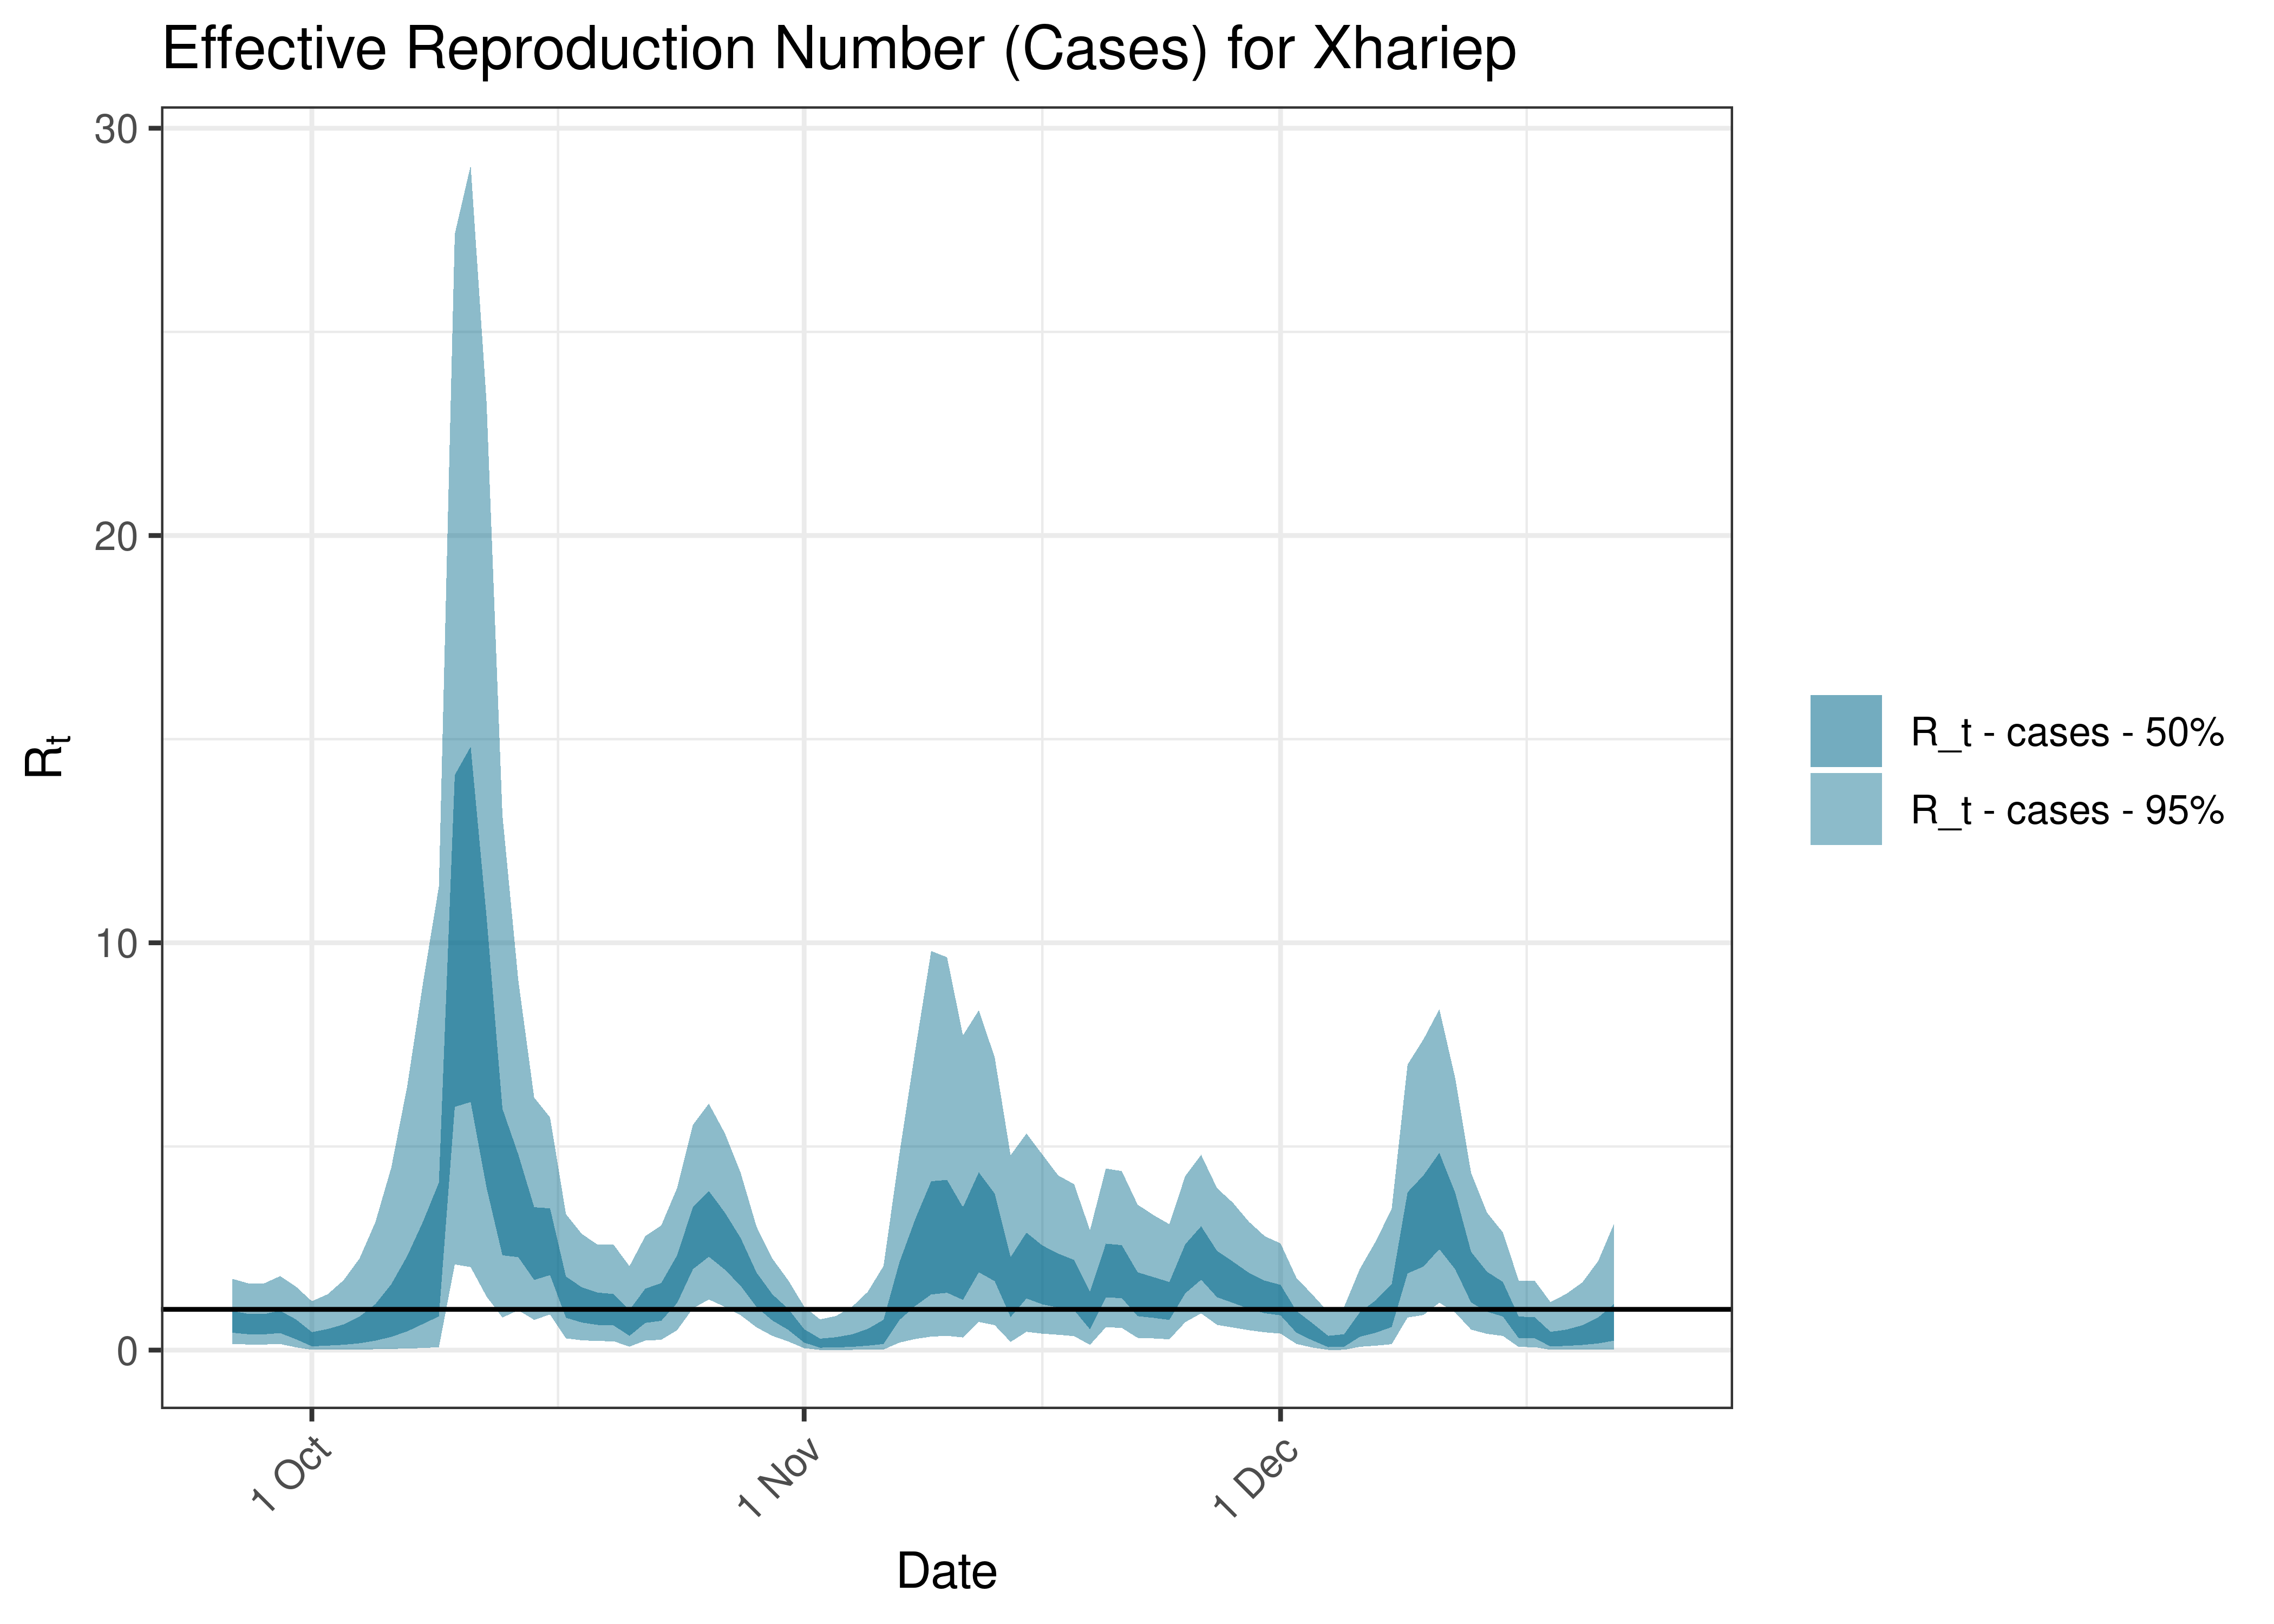 Estimated Effective Reproduction Number Based on Cases for Xhariep over last 90 days